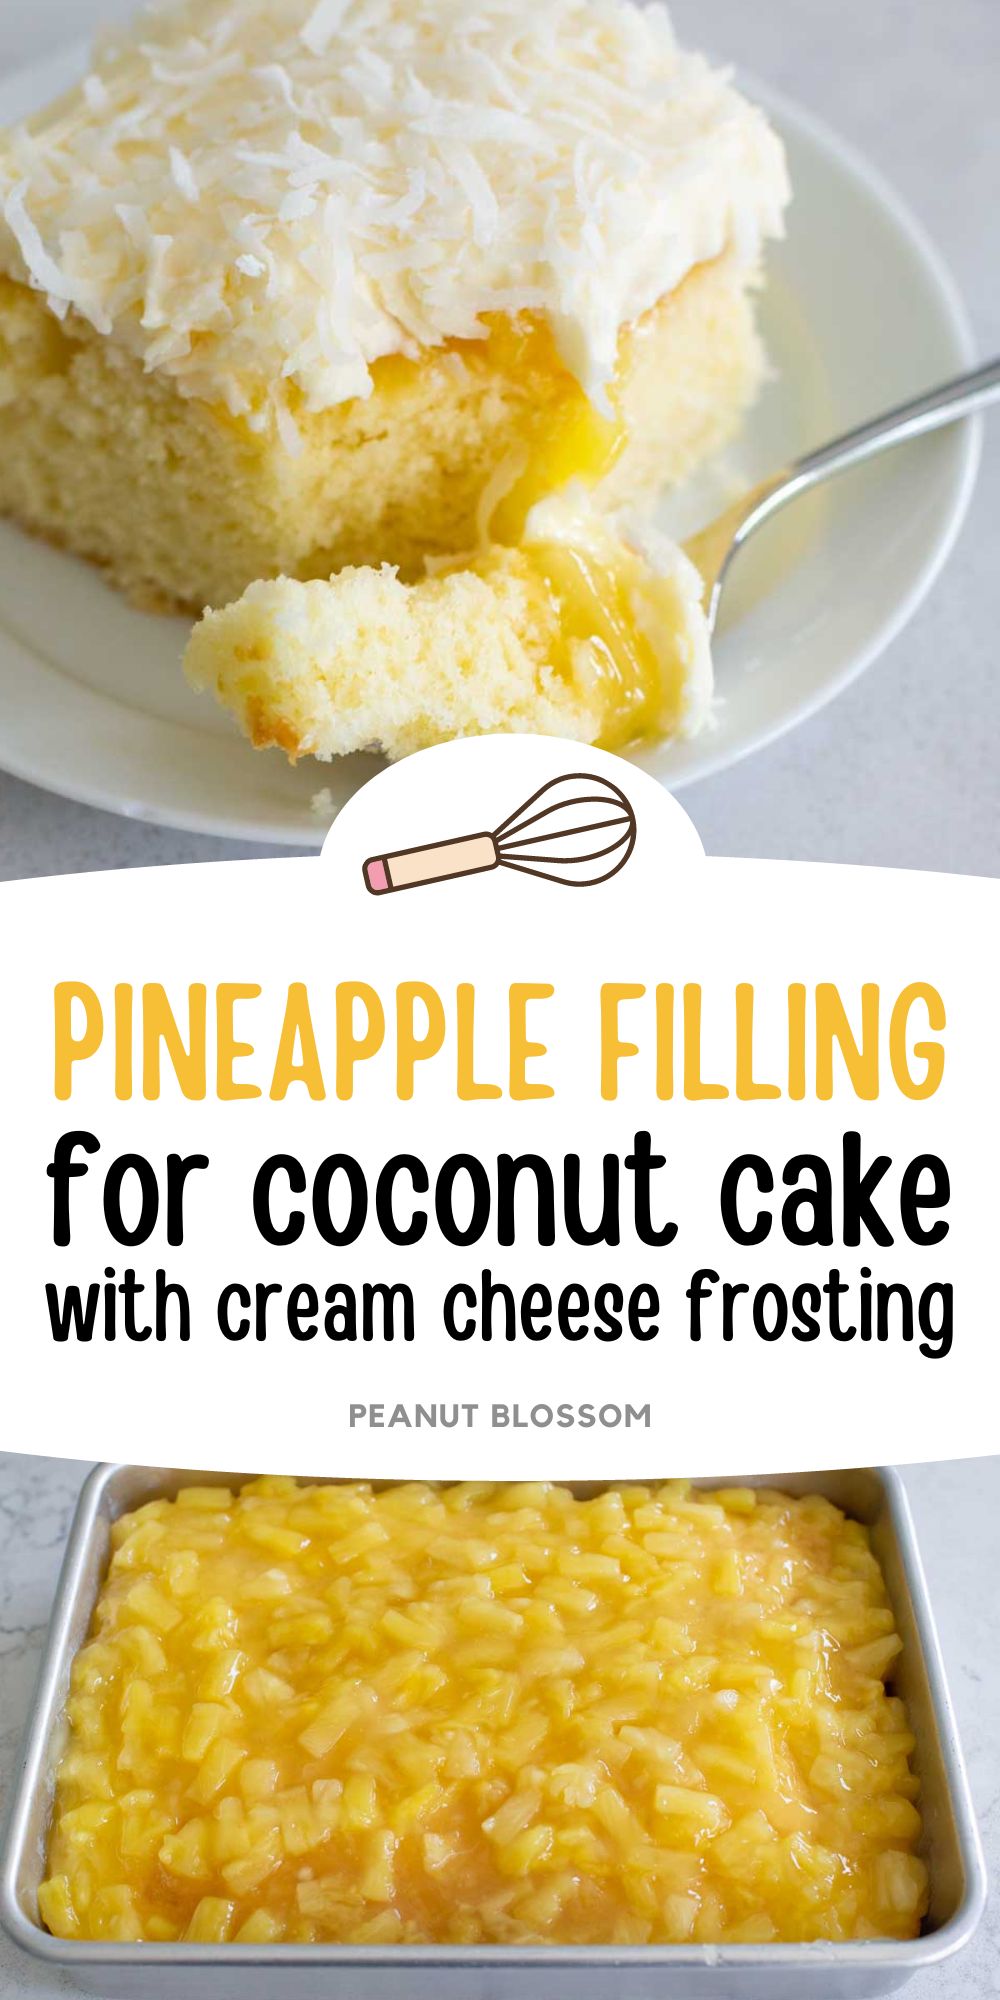 A photo collage shows a piece of coconut cake with pineapple filling next to the cake pan with the filling spread over the top.